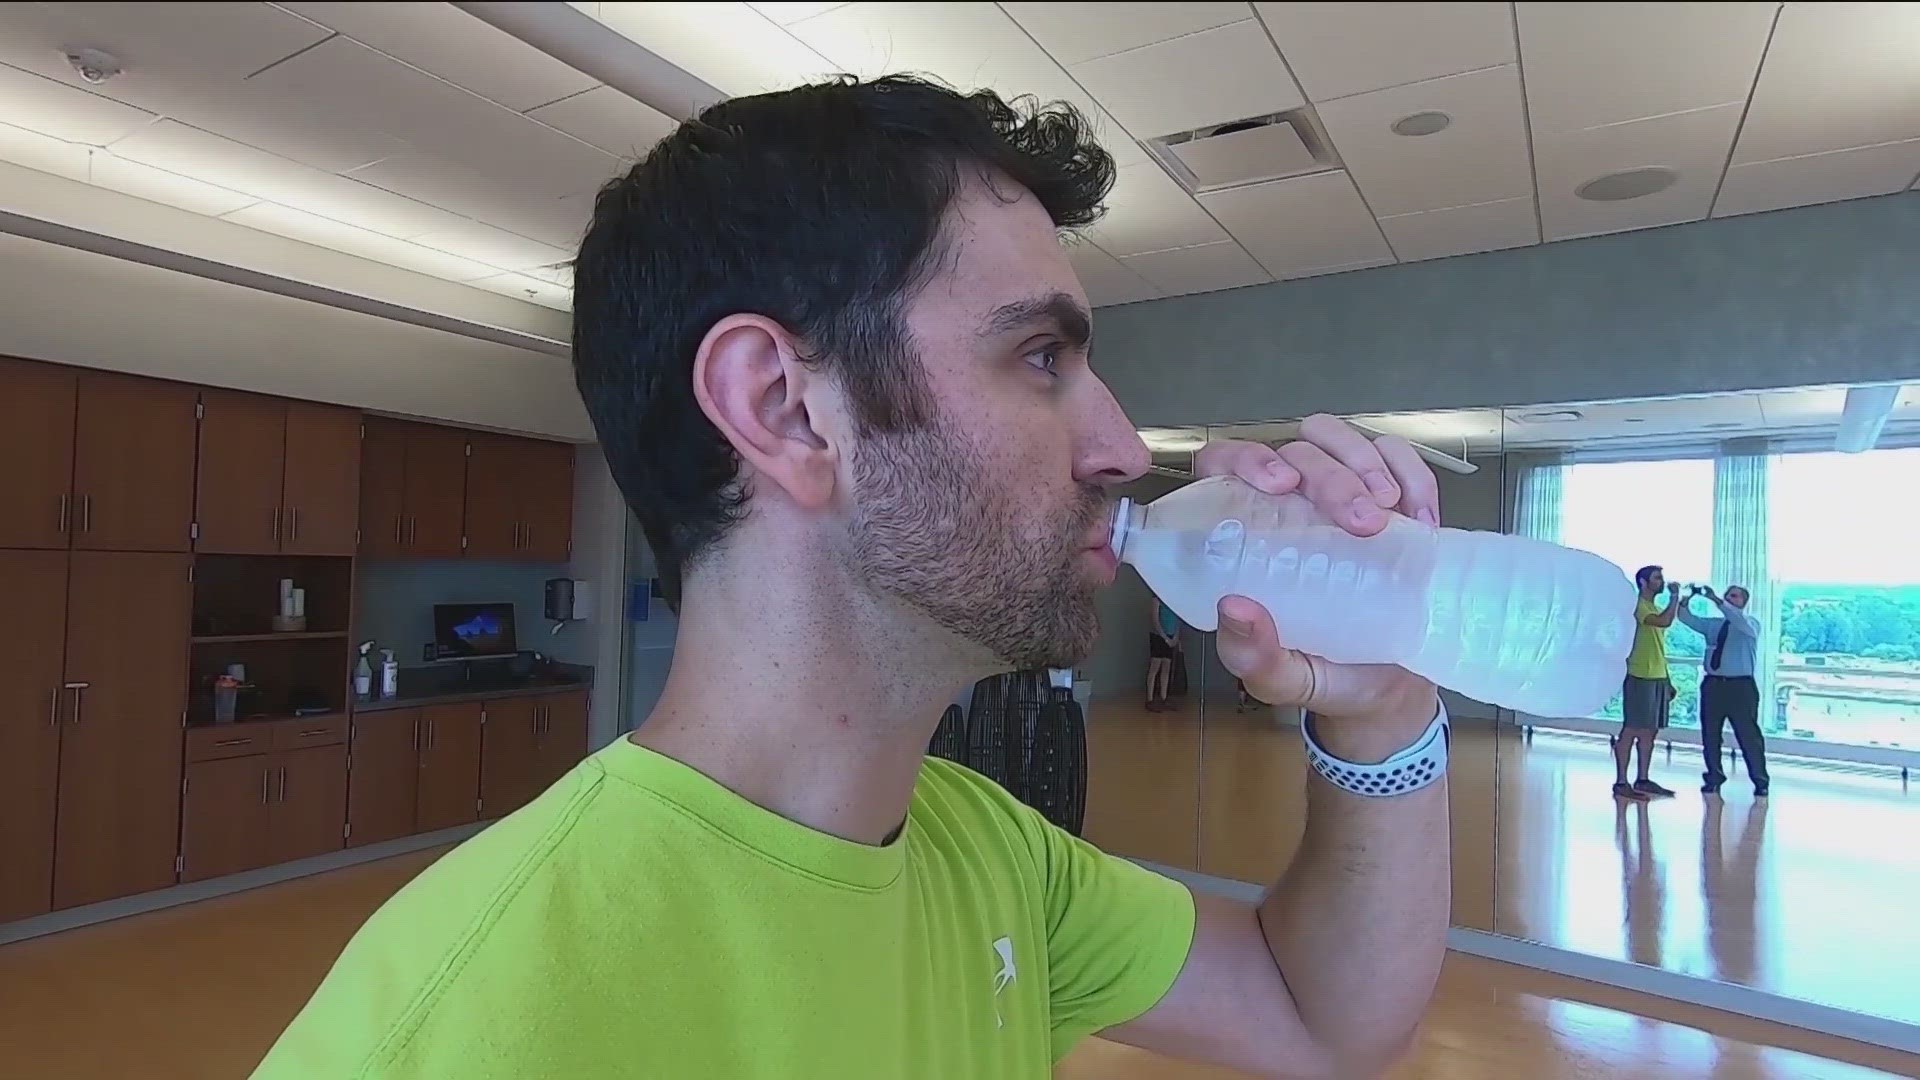 Is Drinking a Gallon of Water a Day Good or Bad for You?